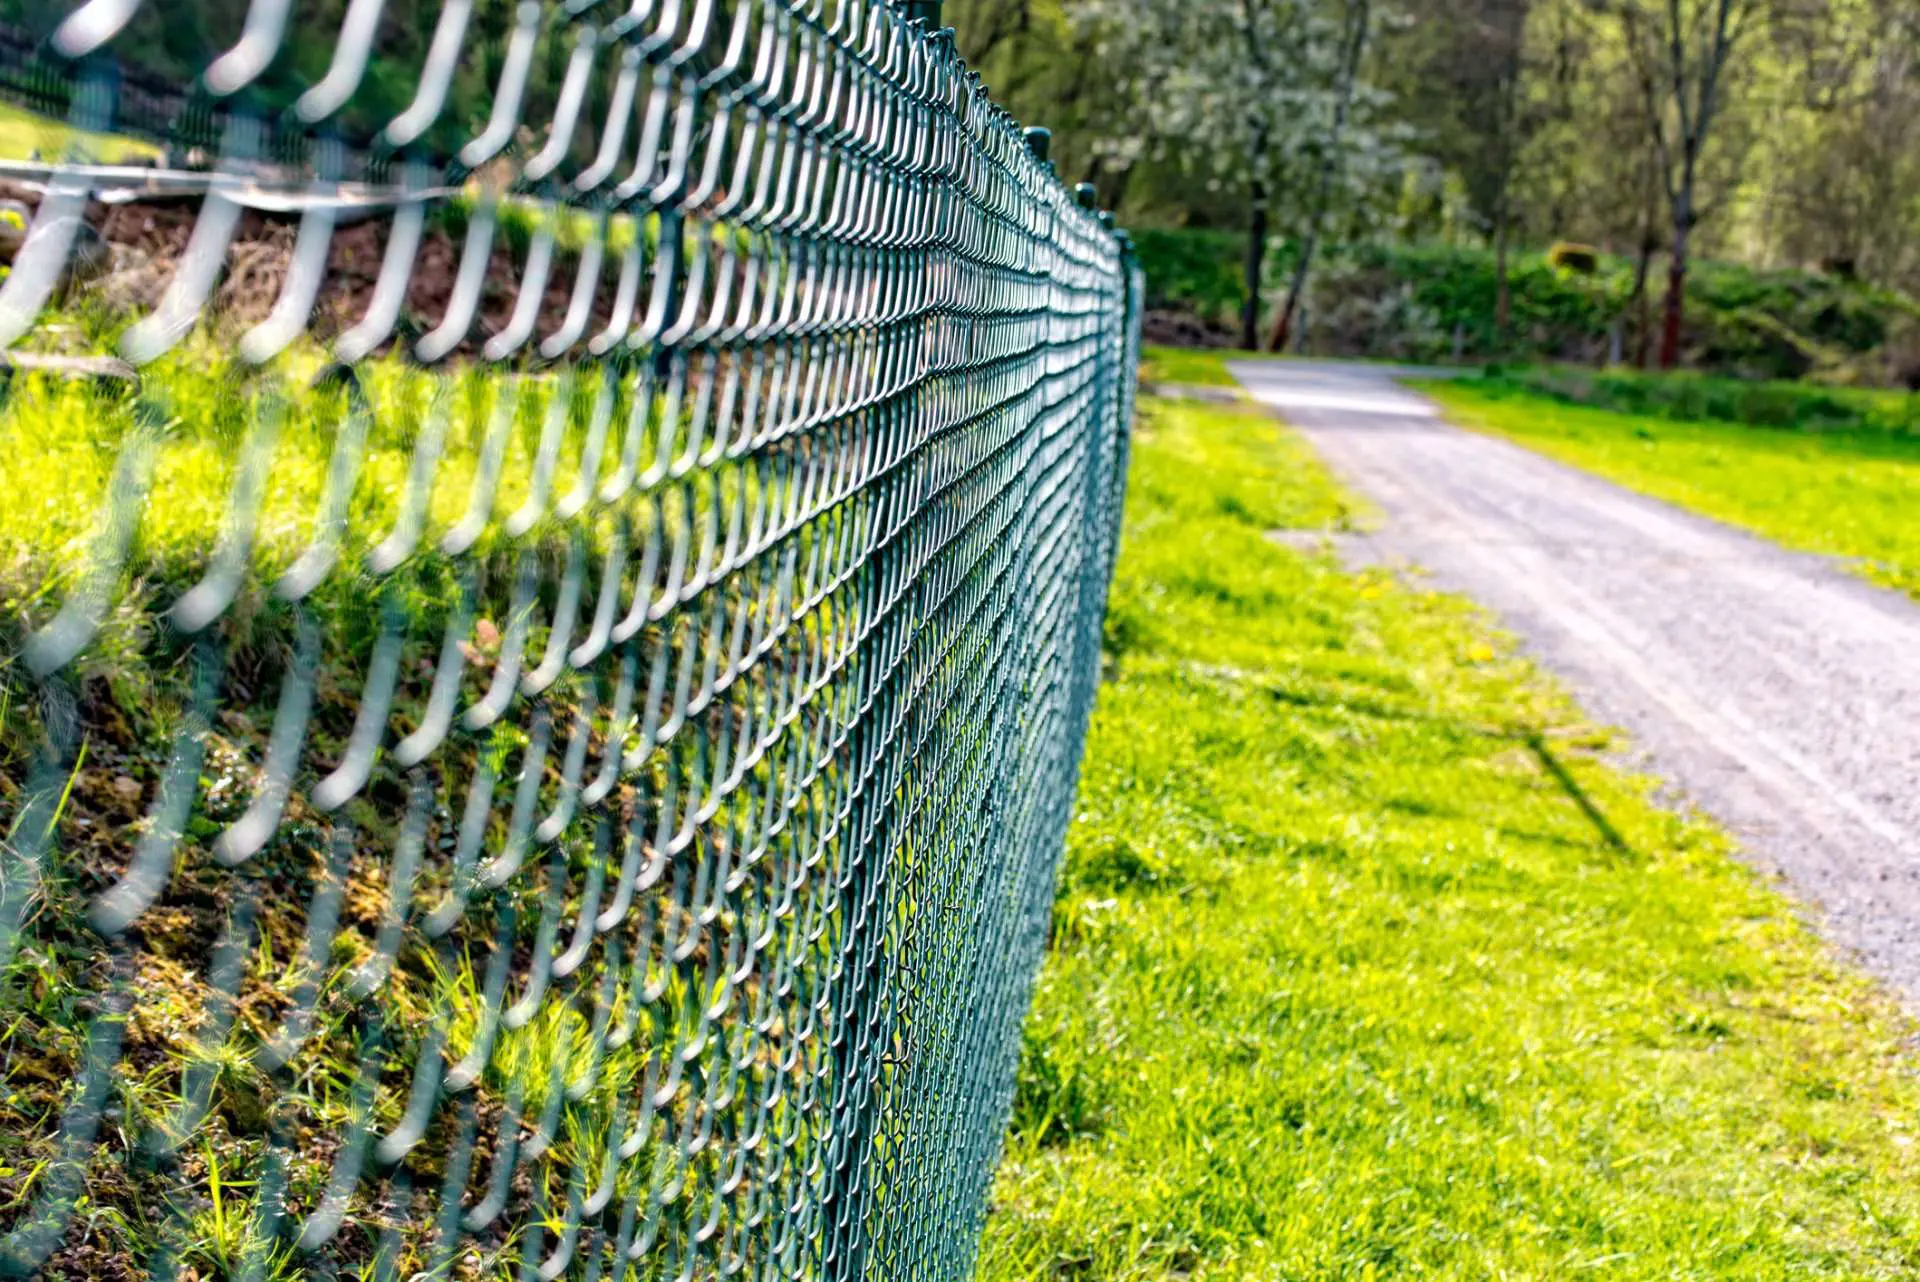 A fence with green metal bars on it's sides.